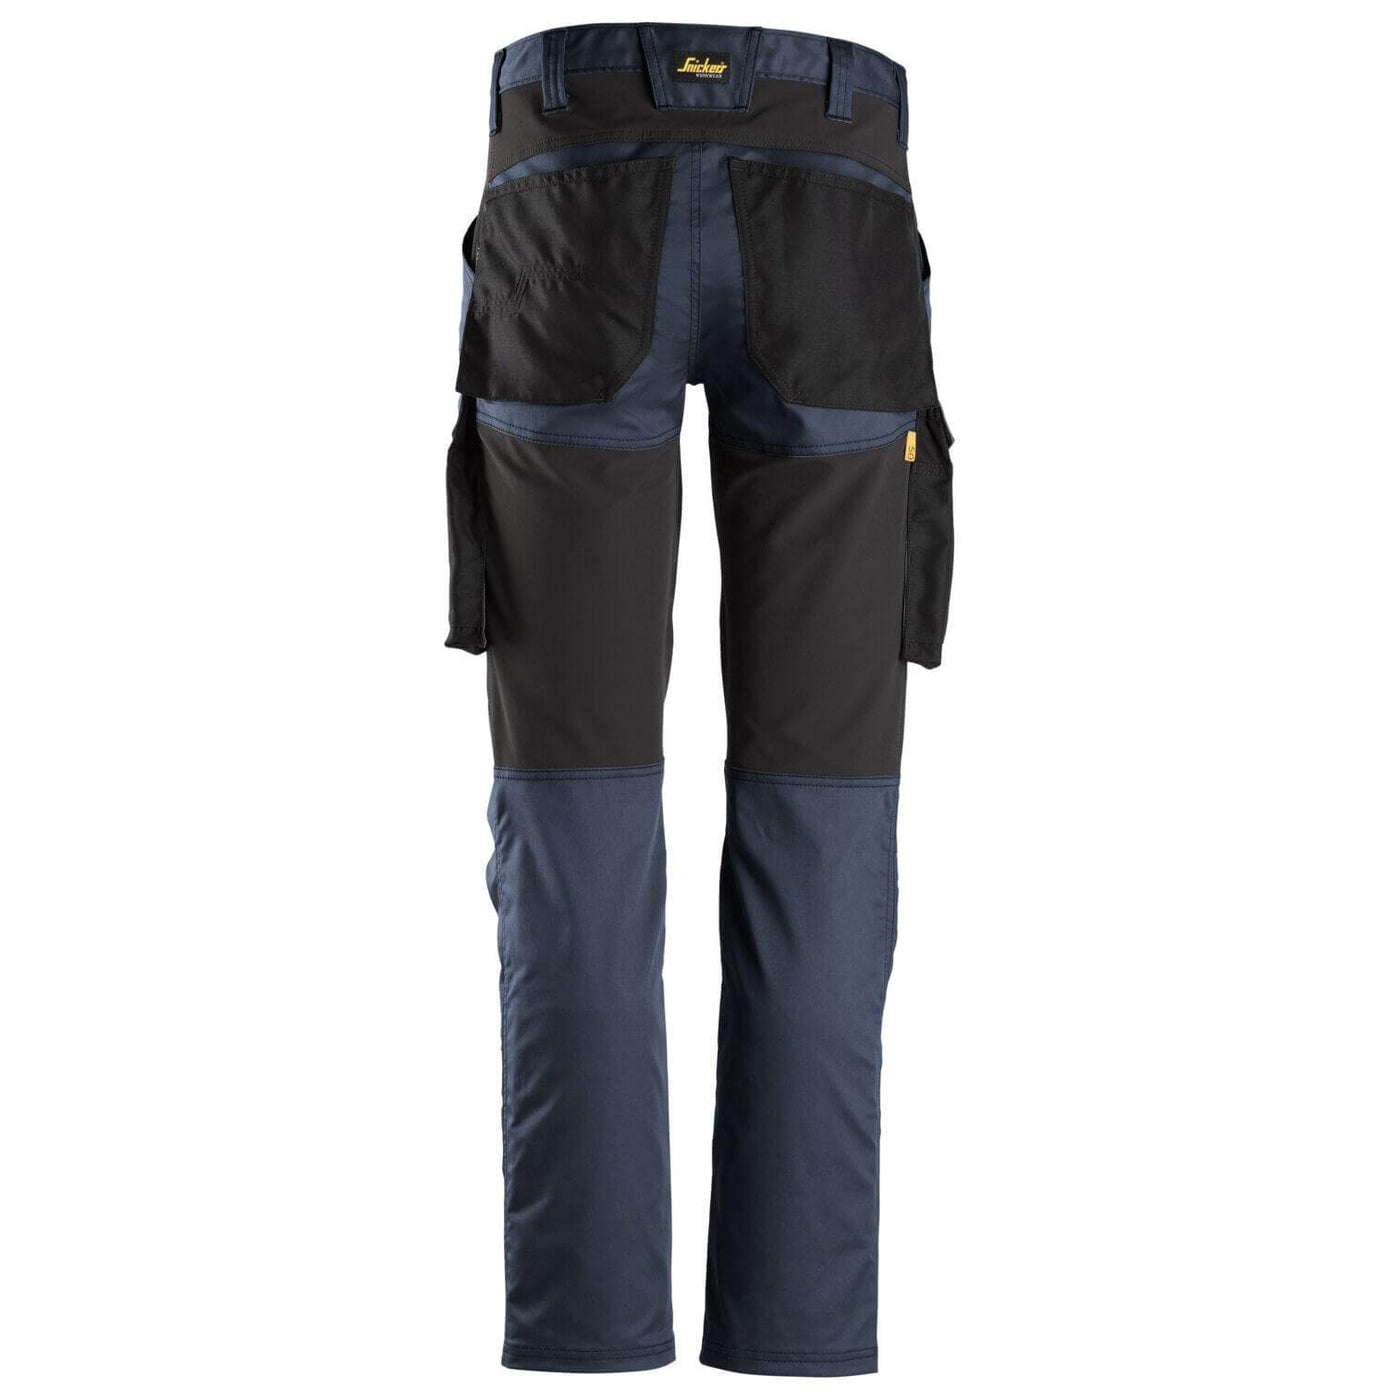 Snickers 6803 AllroundWork Stretch Trousers without Knee Pad Pockets Navy Black back #colour_navy-black